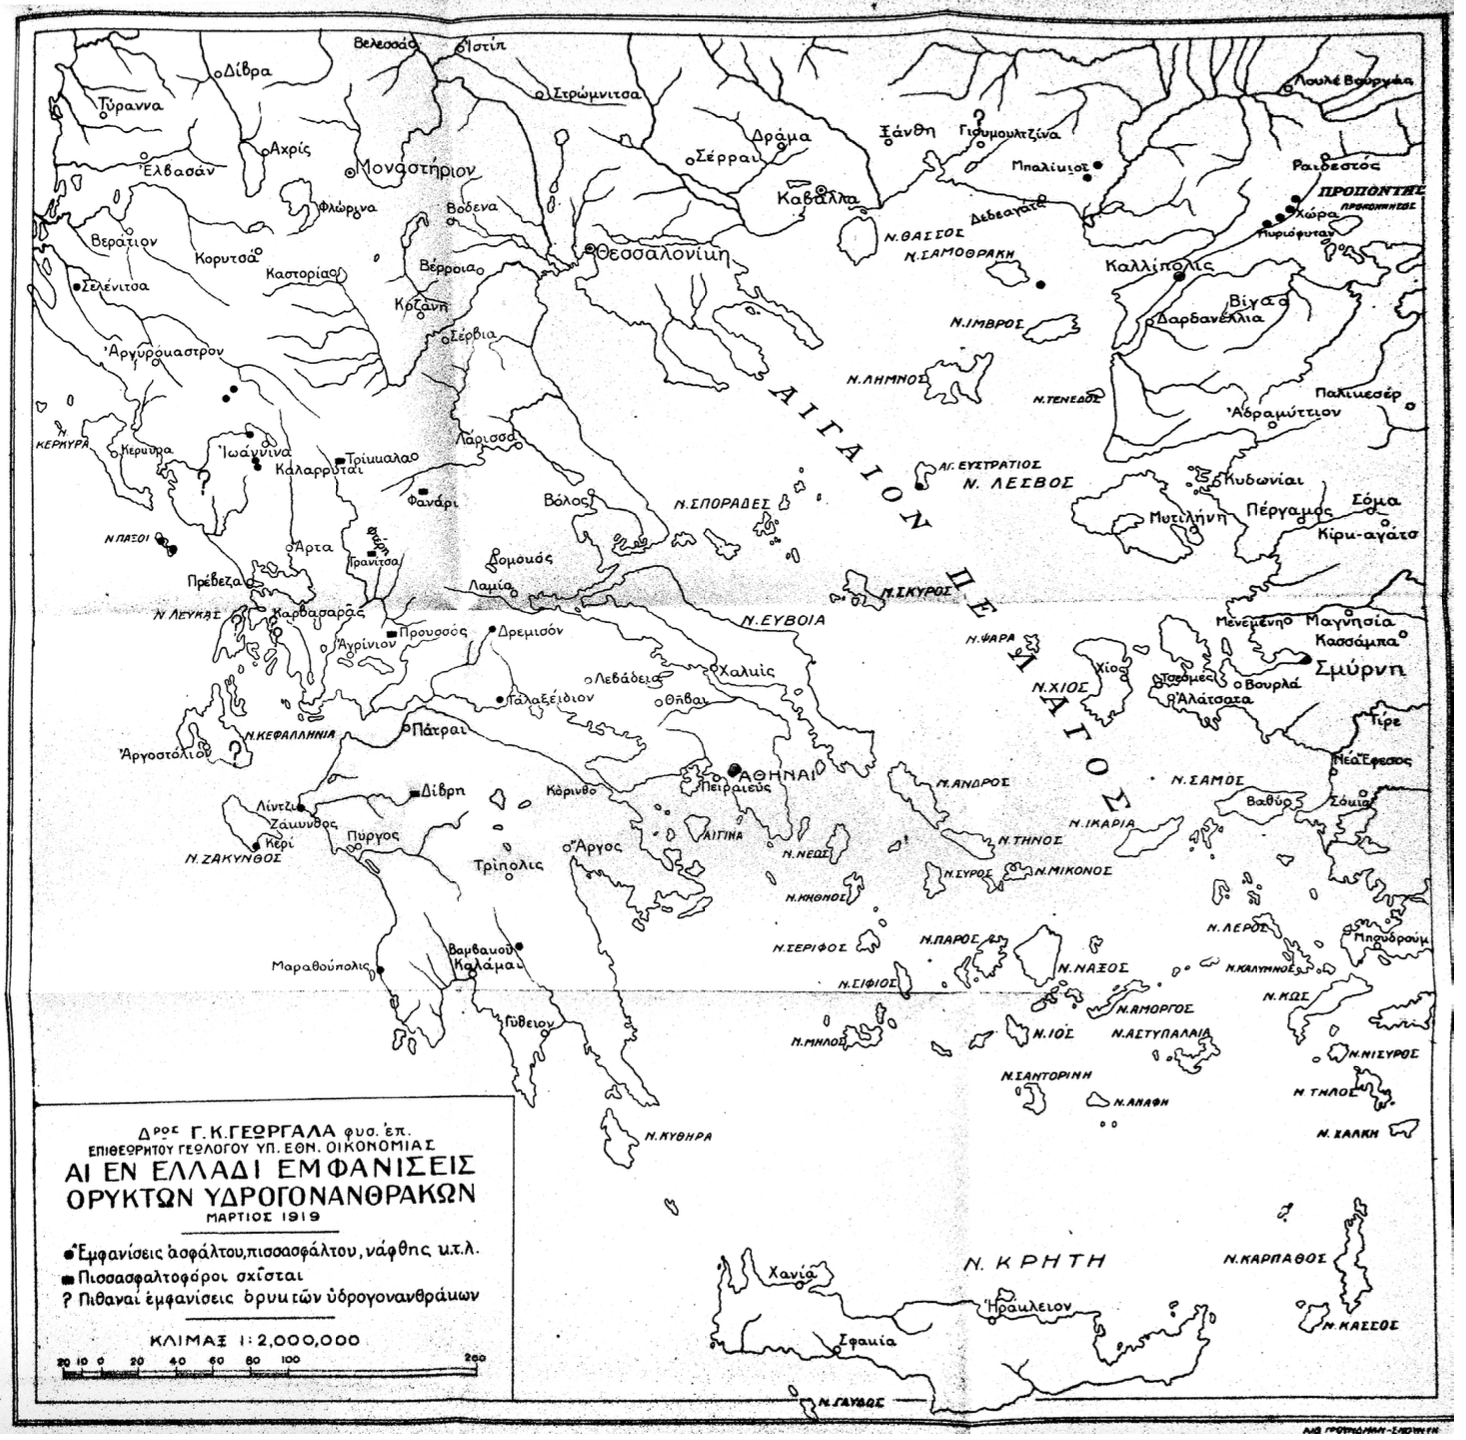 Figure 2: The “appearances of mineral hydrocarbons in Greece”, as depicted in a 1920 report. Zakynthos is the last island to the Southwest, opposite Peloponnese. Dragopsa lies near Ioannina city, opposite Corfu Island. Notice the absence of borders. Source: Georgios Georgalas (ed.), Επιτροπή επί των καυσίμων: Πορίσματα, εκθέσεις και υπομνήματα του μεταλλευτικού τμήματος αυτής [Fuel Committee: Findings, Reports and Memoranda of its Mining Section] (Athens: Ipourgeion Ethnikis Oikonomias, 1920), appendix.